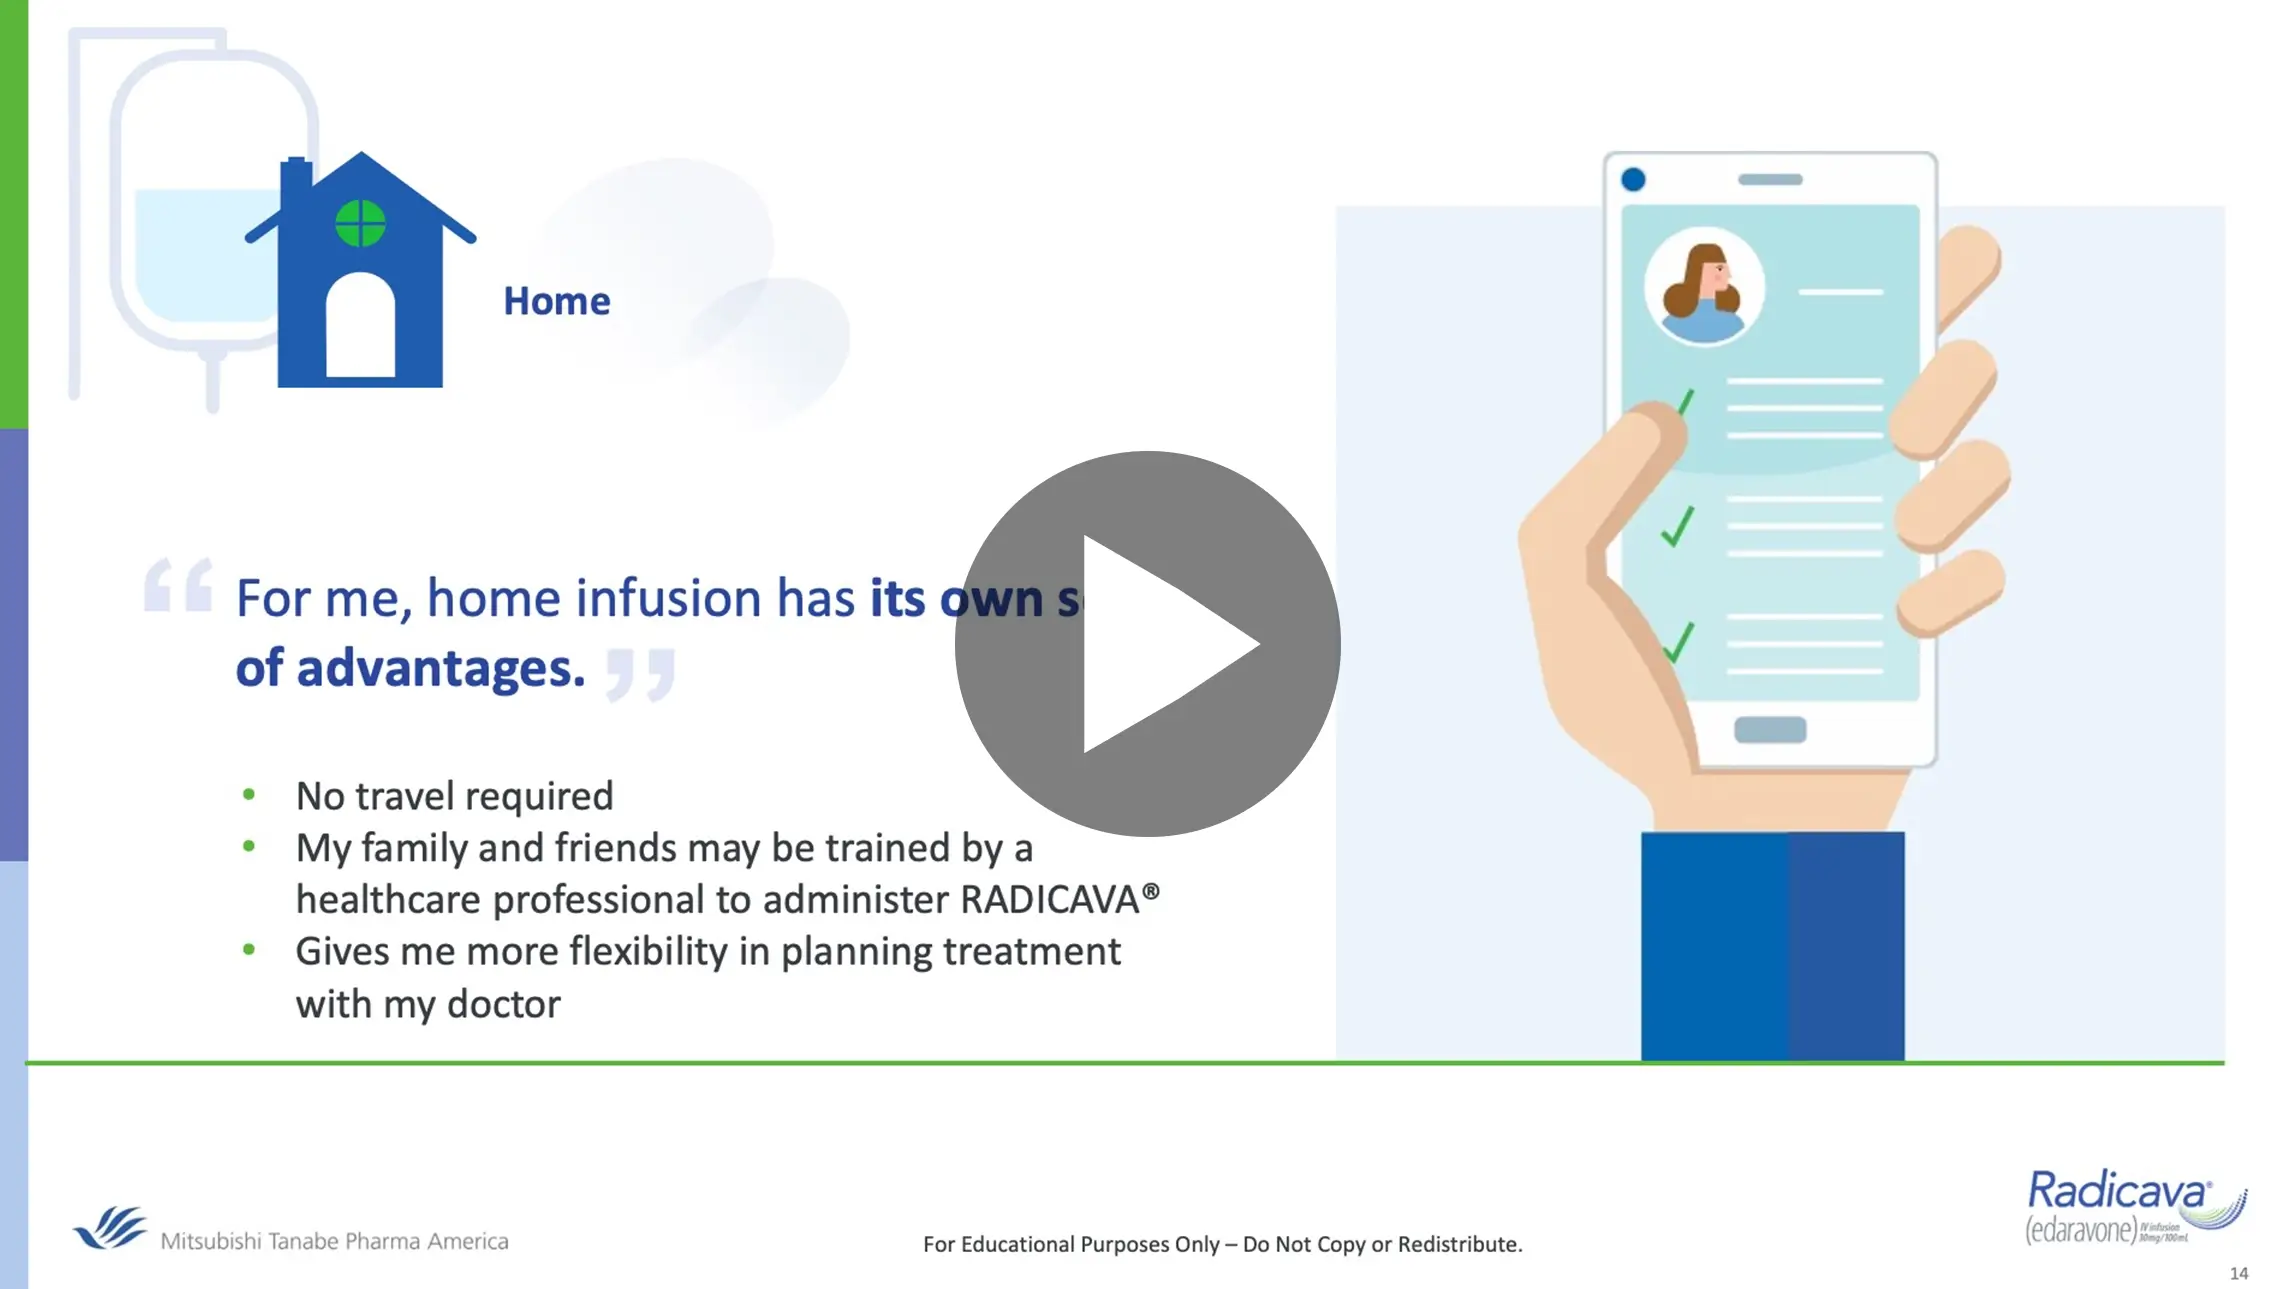 Sunny discusses her infusion experience with RADICAVA®